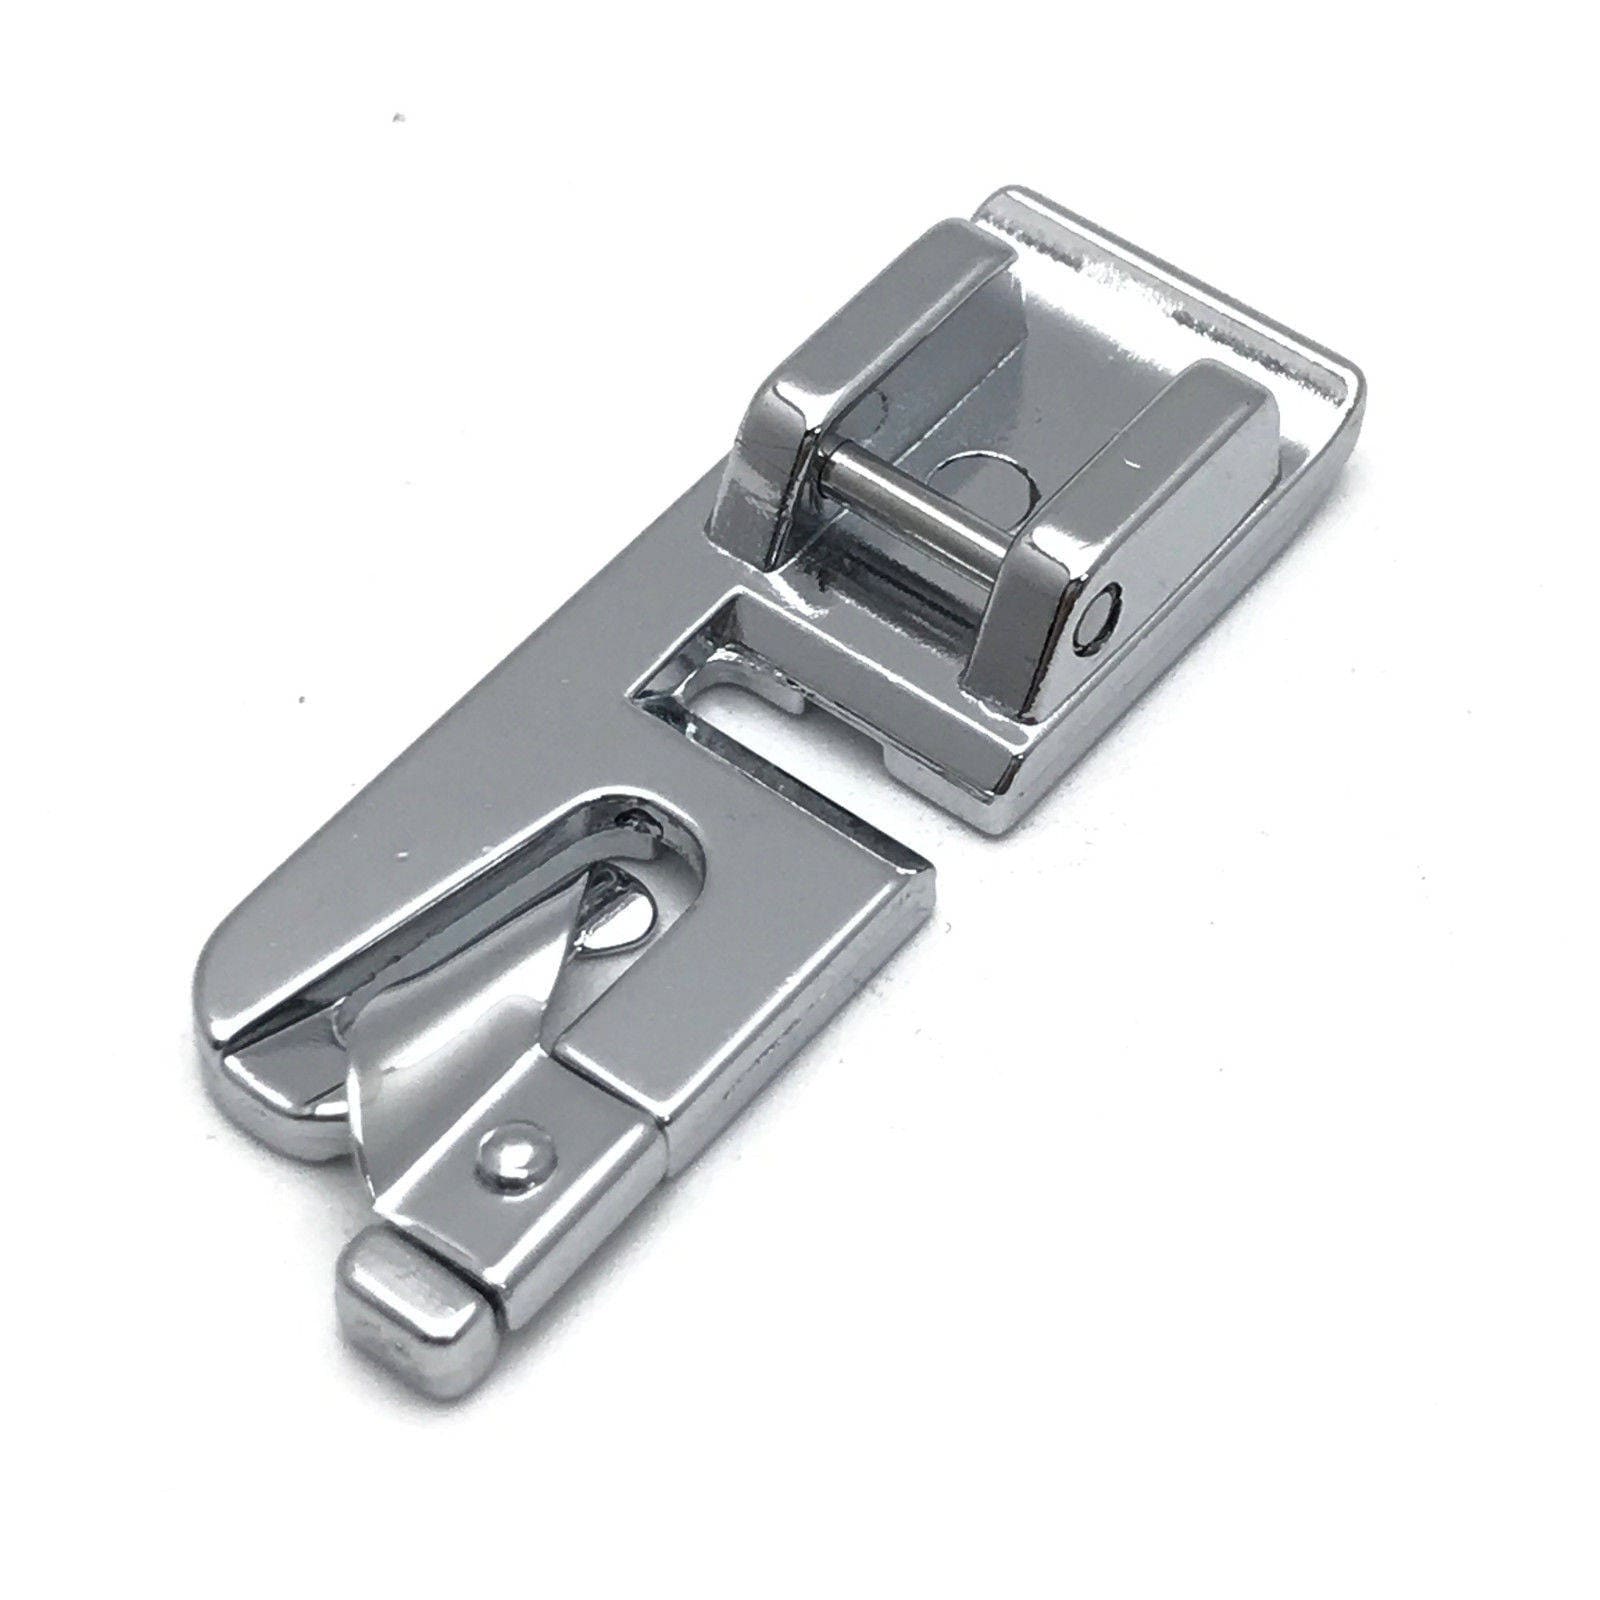 Sewing Rolled Hemmer Foot Universal, Sewing Rolled Hemmer Foot, Universal  Sewing Rolled Hemmer Foot Set, 3mm-10mm 8 Sizes Sewing Machine Presser Foot